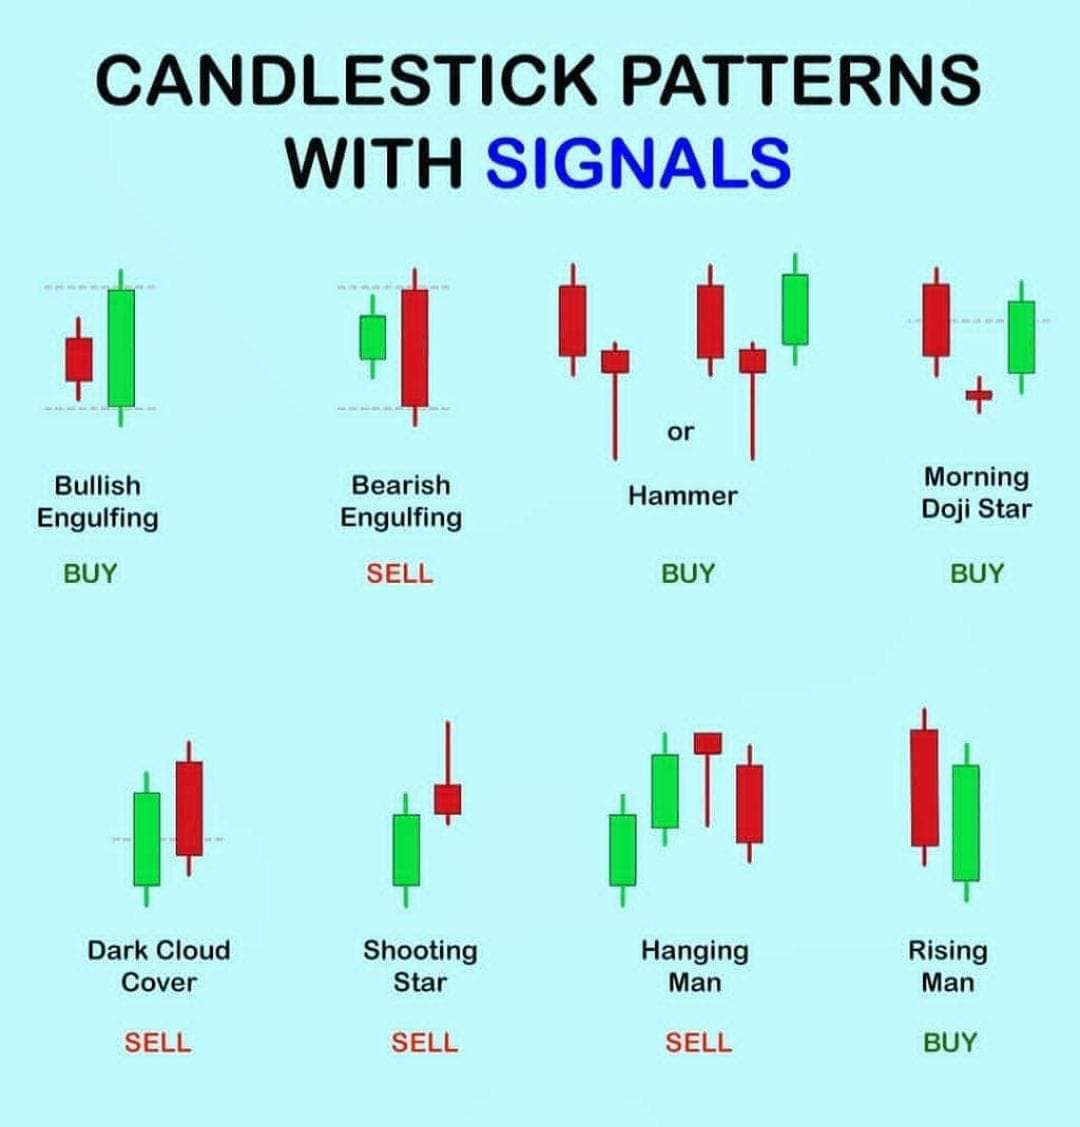 Candlestick Patterns with Signals | Indian Stock Market Hot Tips